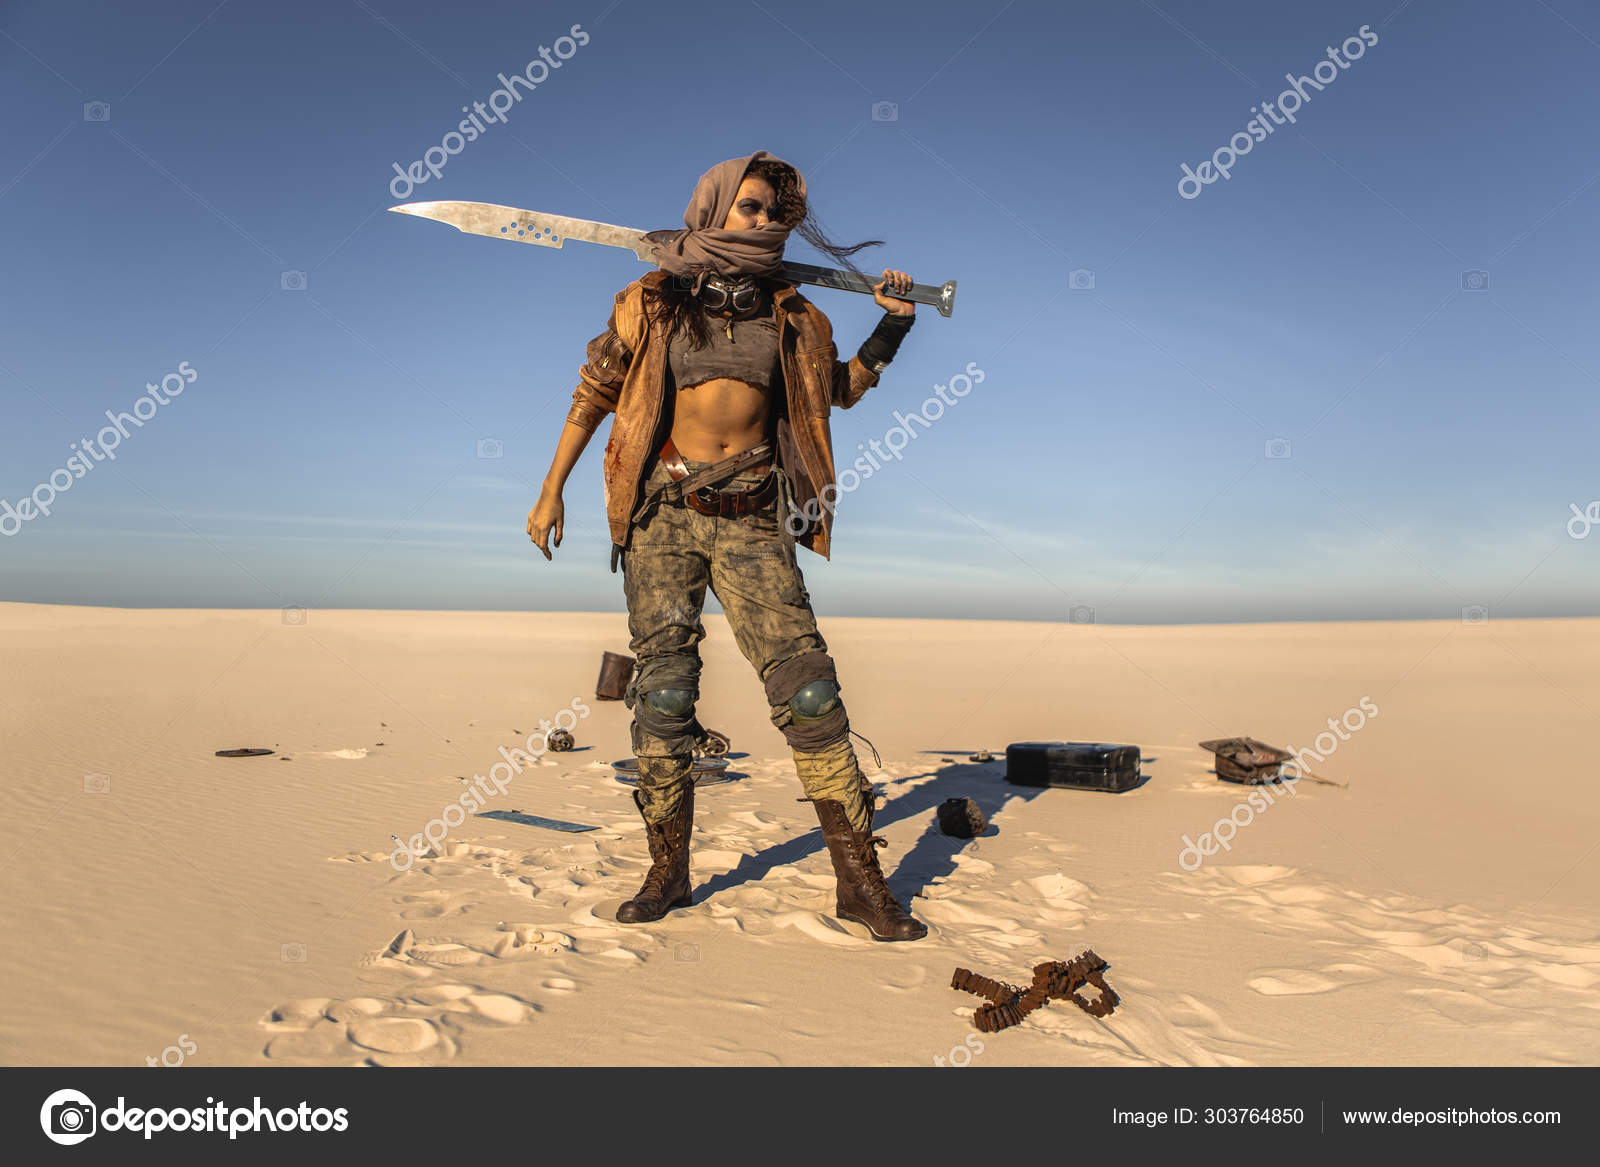 Post-apocalyptic Woman Outdoors in a Wasteland Stock Photo by